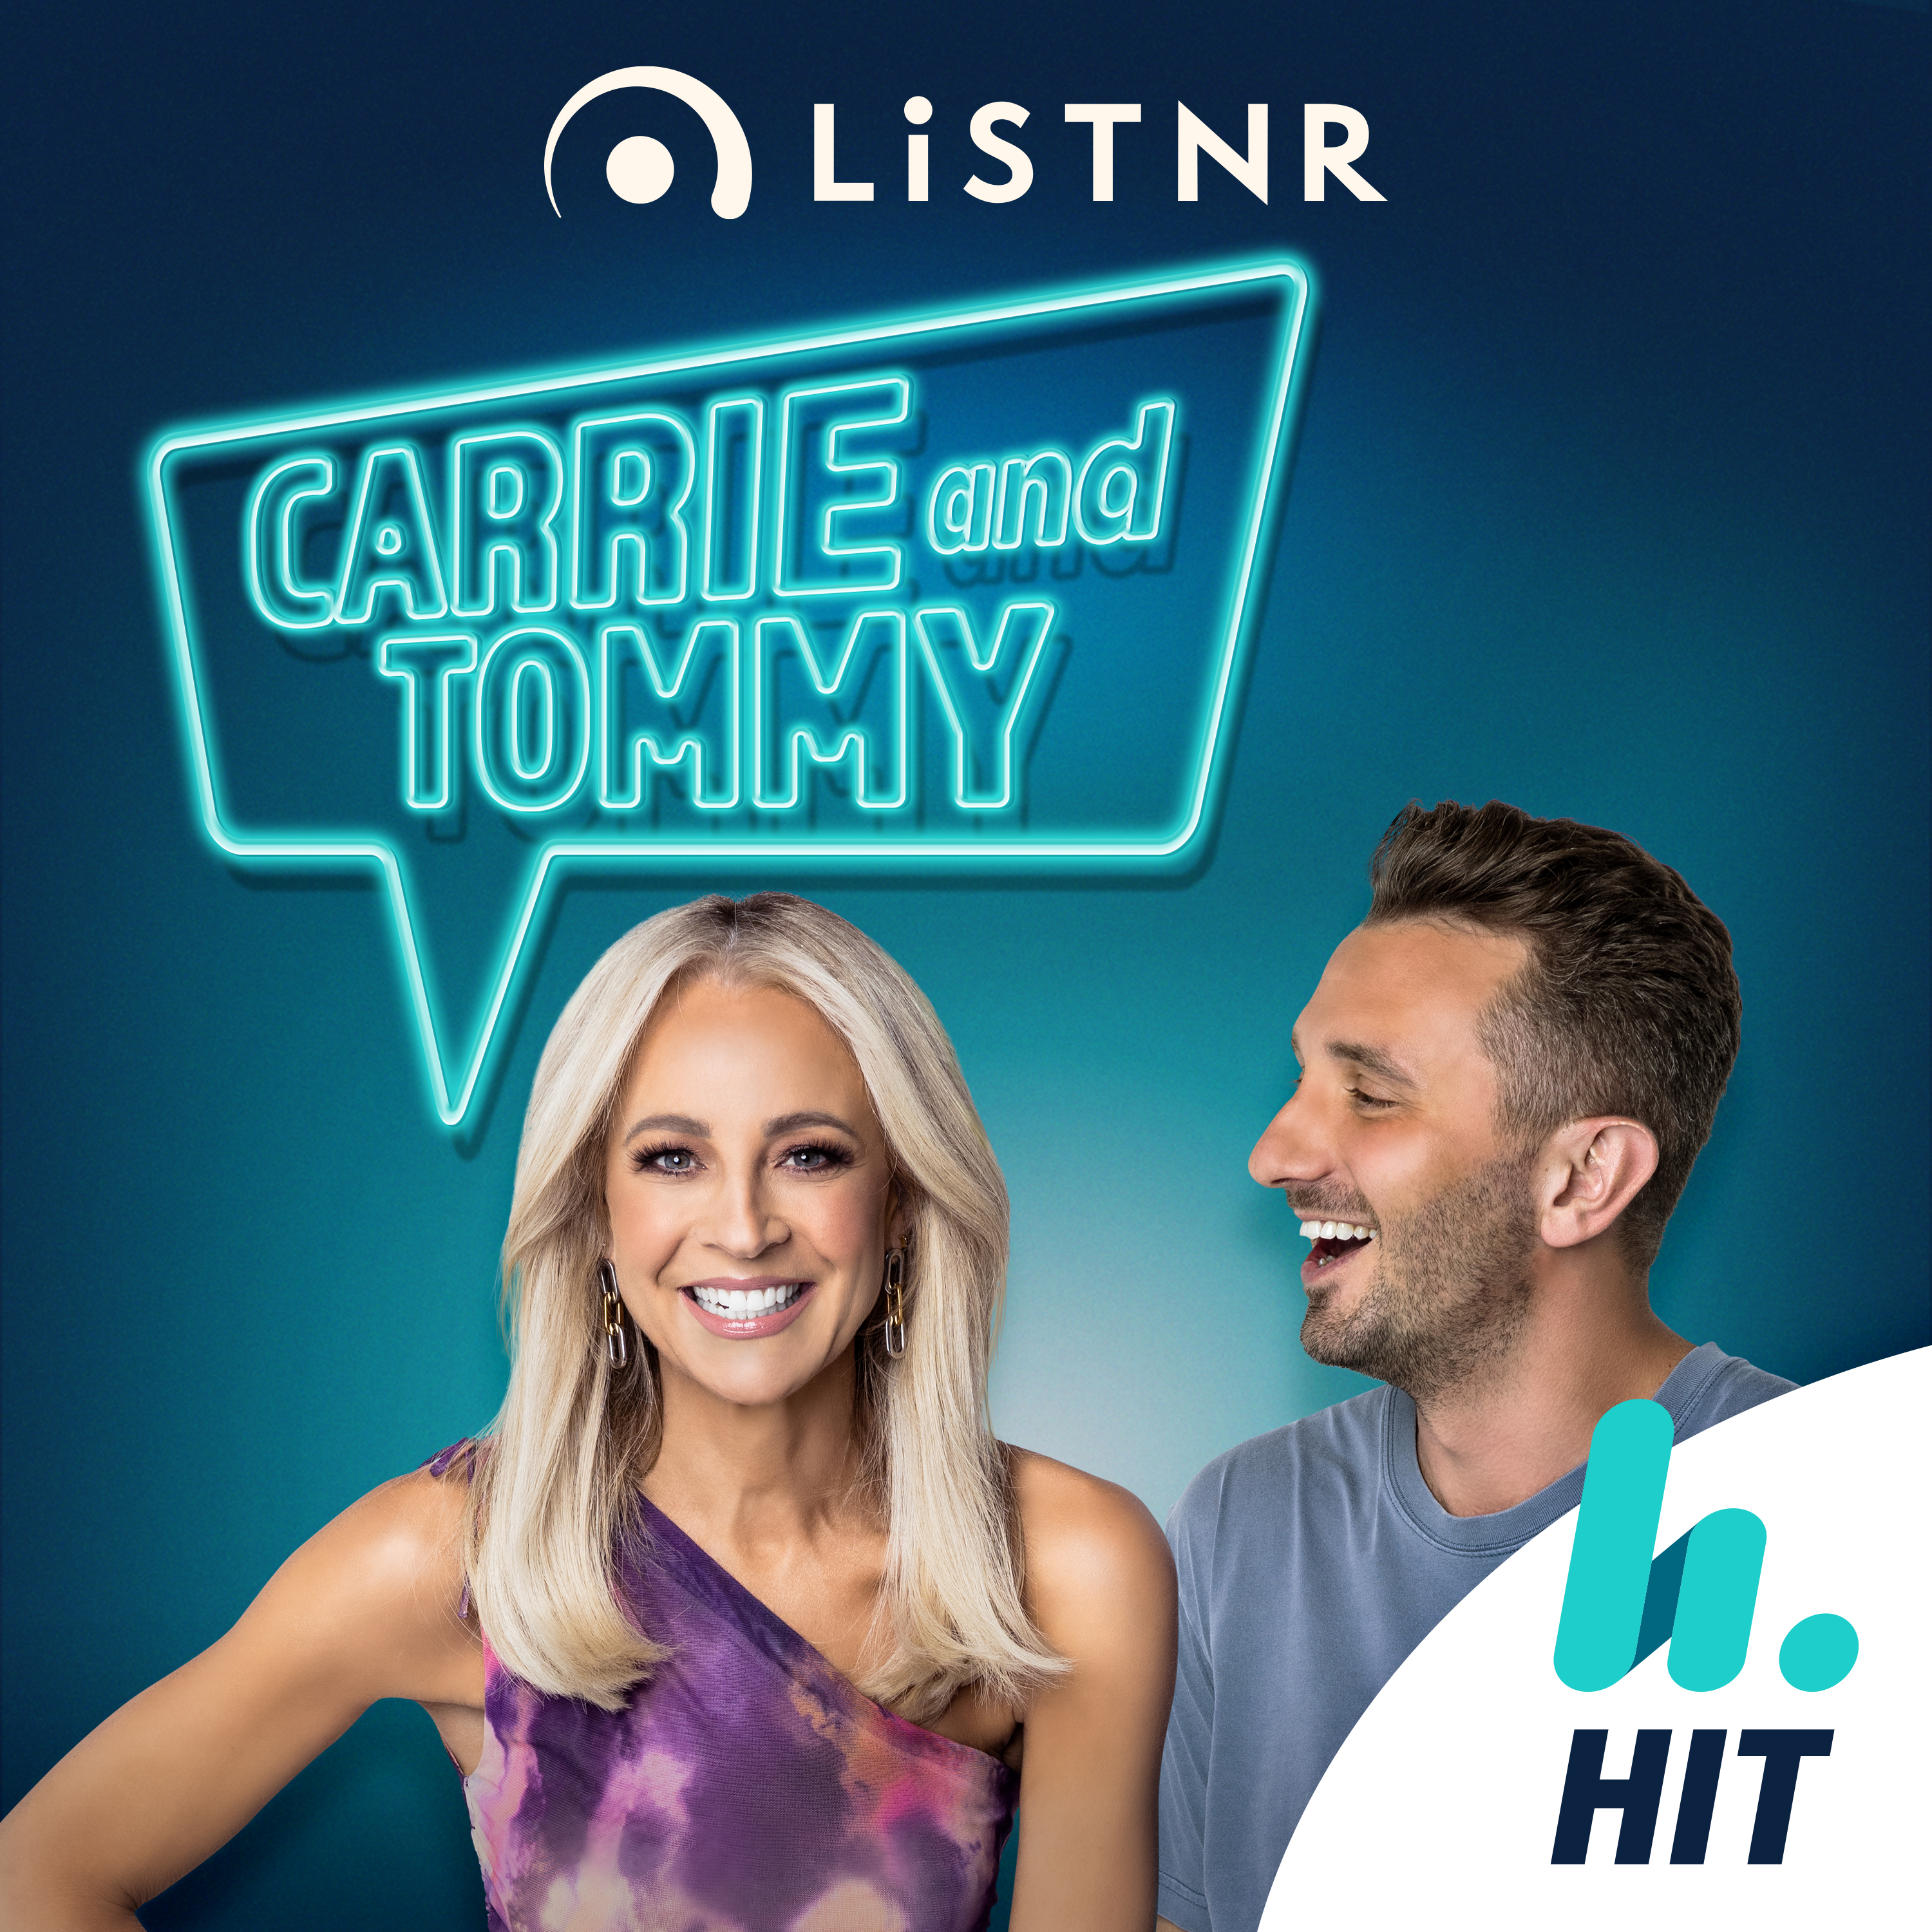 CHRIS MARTIN joins the show! Carrie gives us FASHION ADVICE, AND Pete Helliar is PUT ON NOTICE!